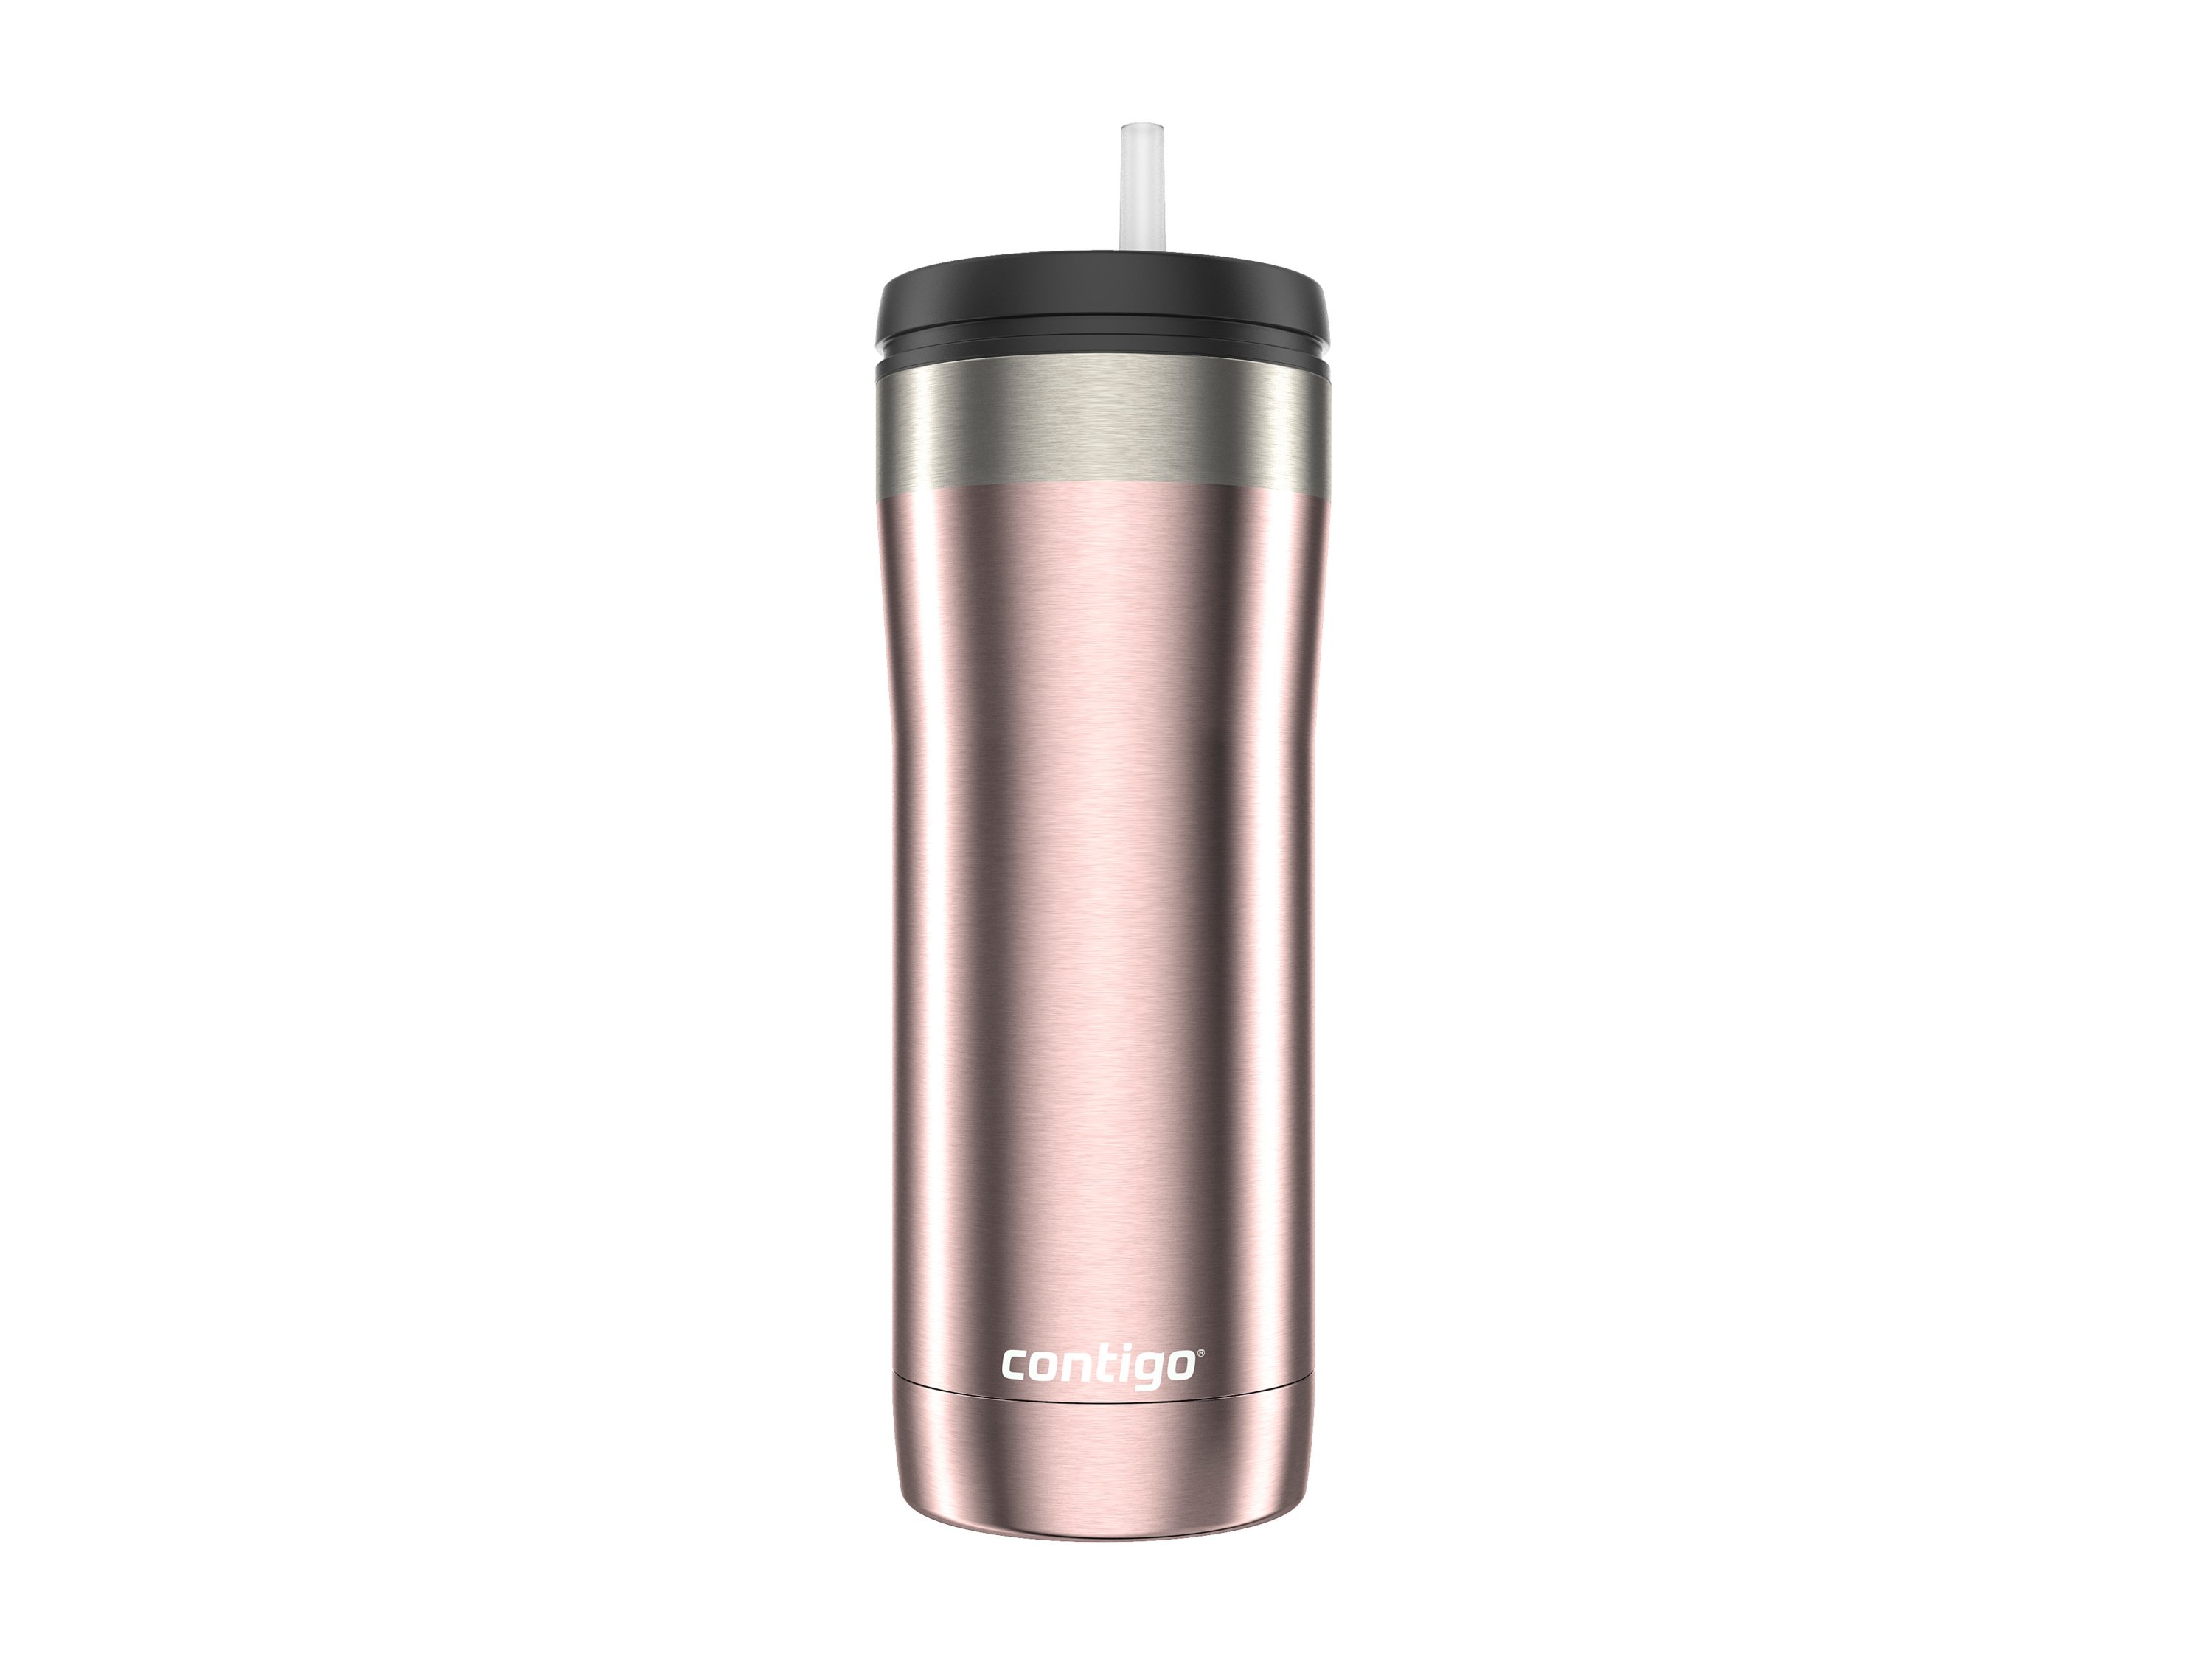 Stainless Steel Water Bottle Pop Up Vacuum Insulated Portable for Sports Easy to Open Thermos Cup Contigo Water Bottle Steel Water Bottle Brown